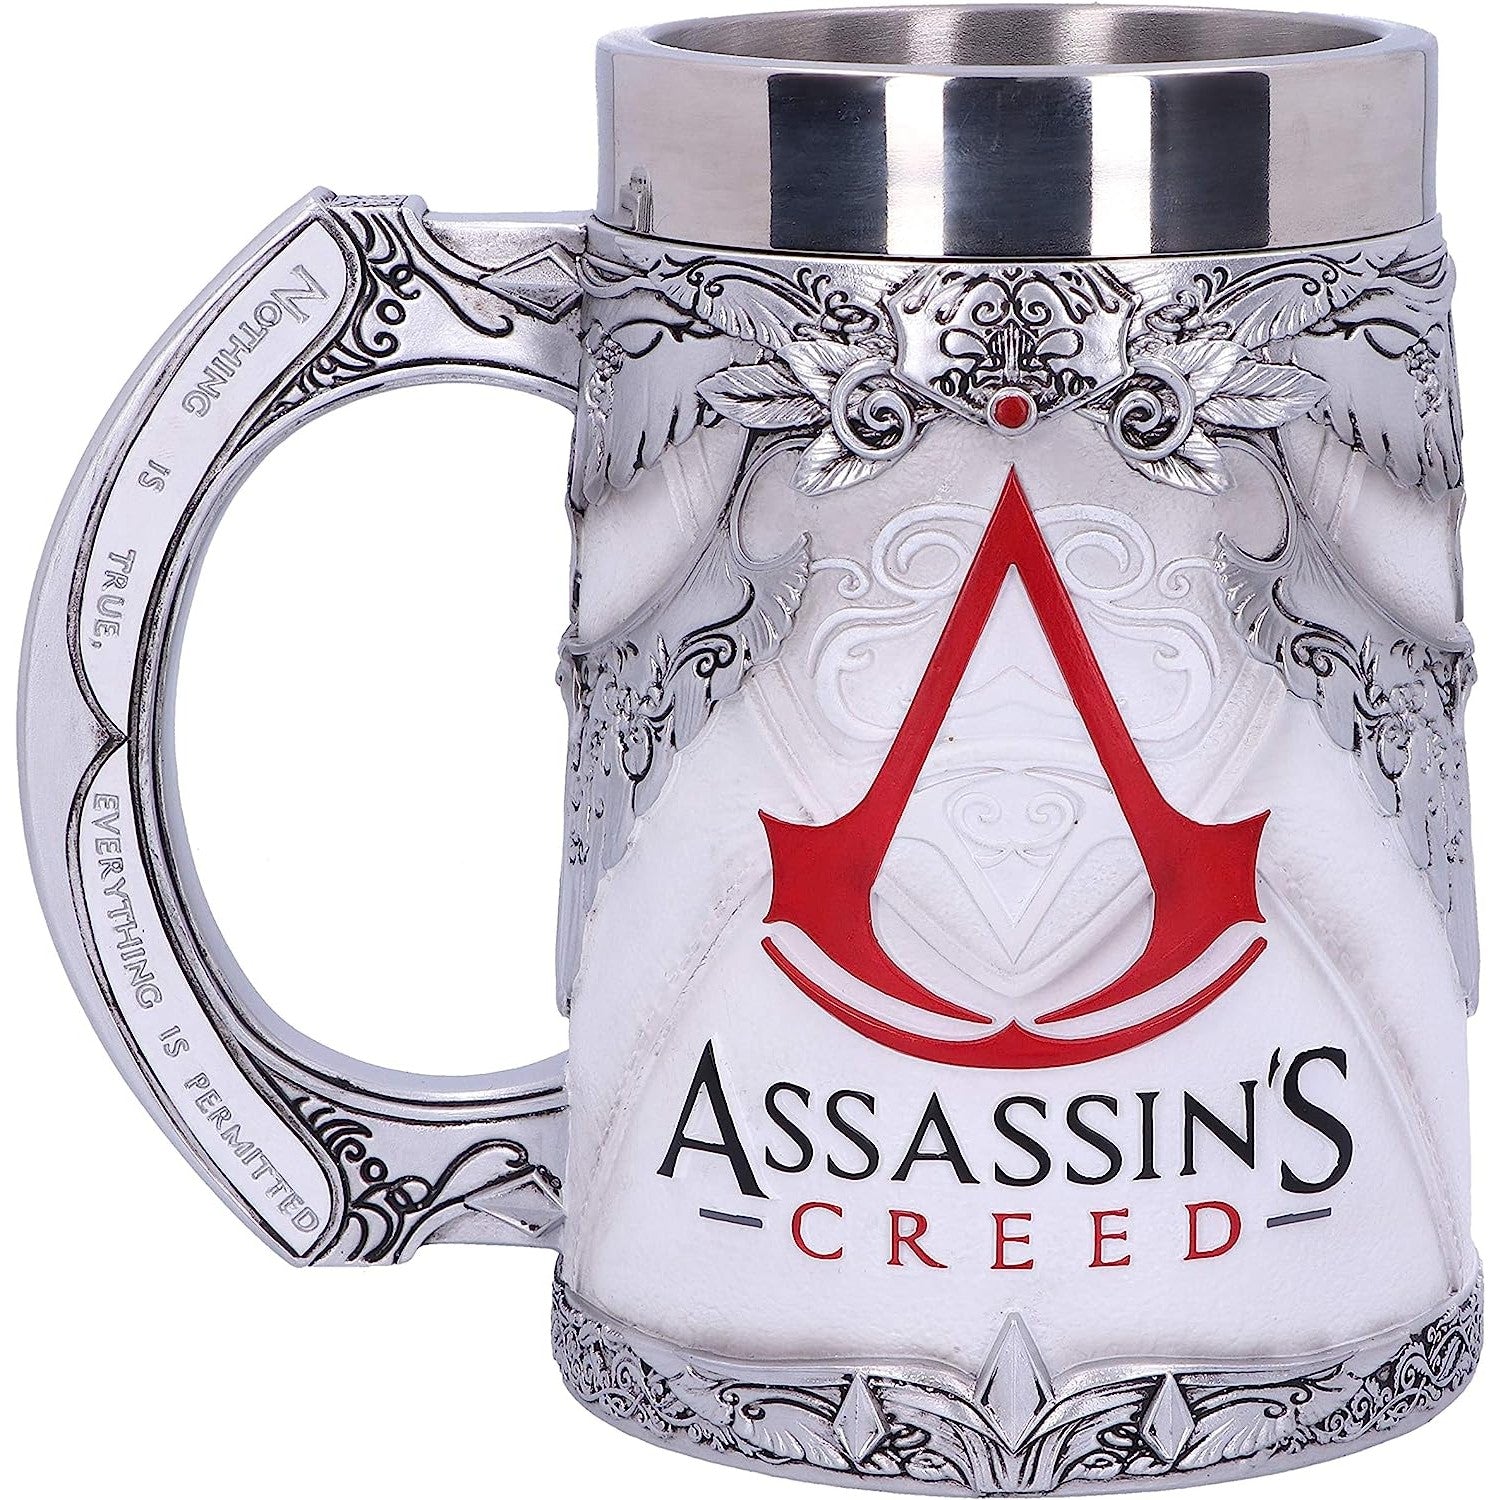 An officially licensed Assassin's Creed tankard.